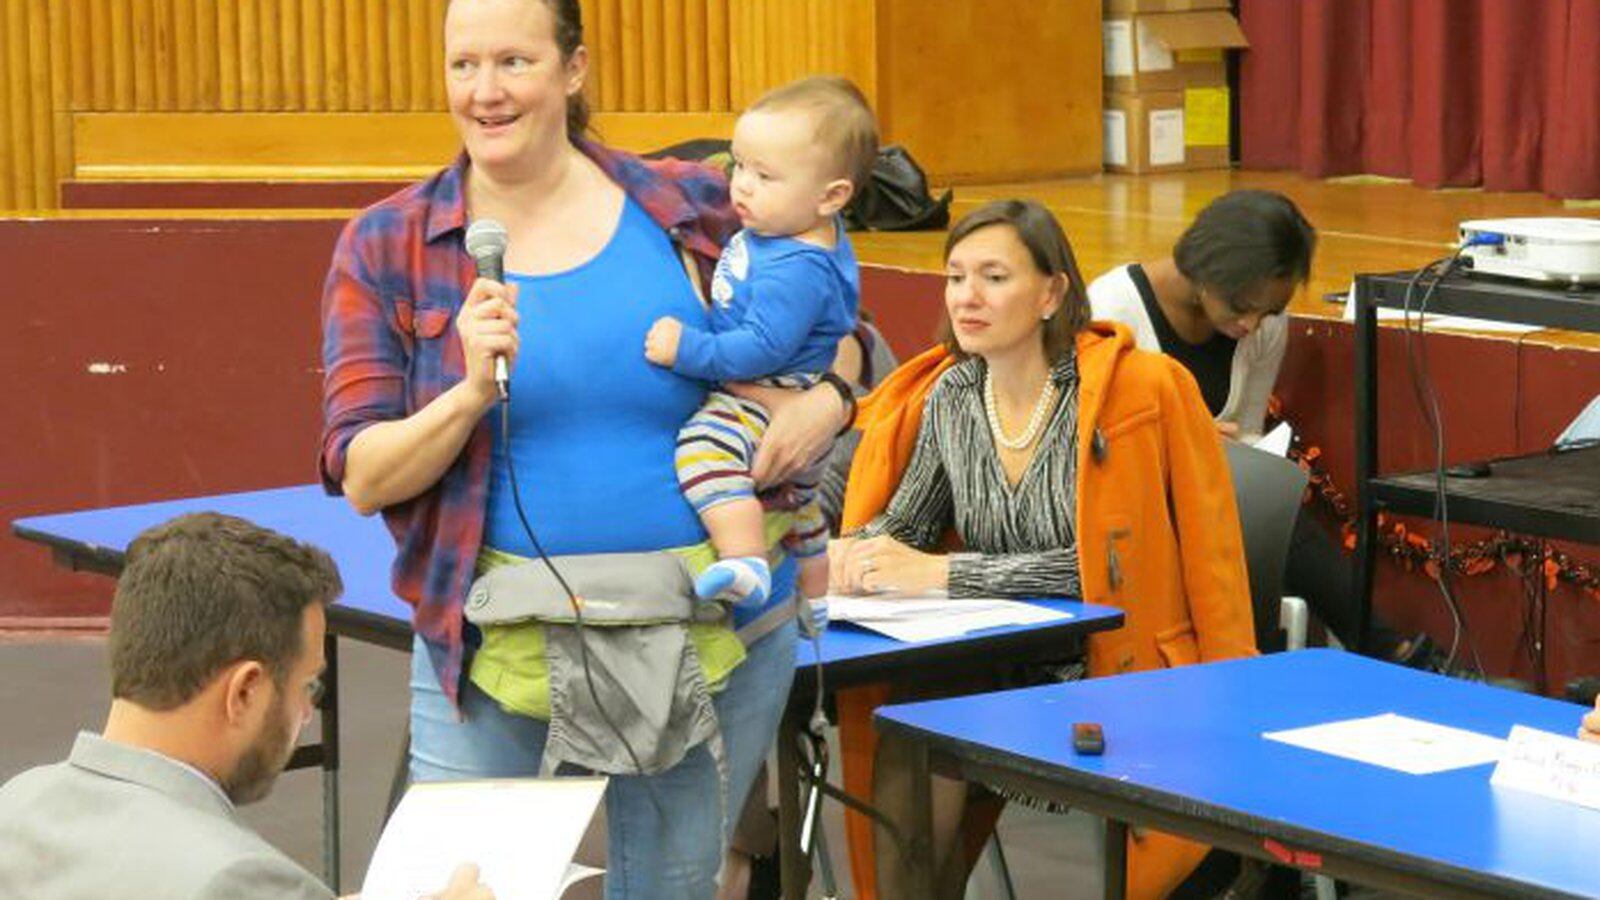 Carole-Ann Moench, a teacher at Global Neighborhood Secondary School, expresses her reluctant support for a plan to merge the school with P.S. 96. To the right is Deputy Chancellor of Operations Elizabeth Rose. ( Photo by Geoff Decker )